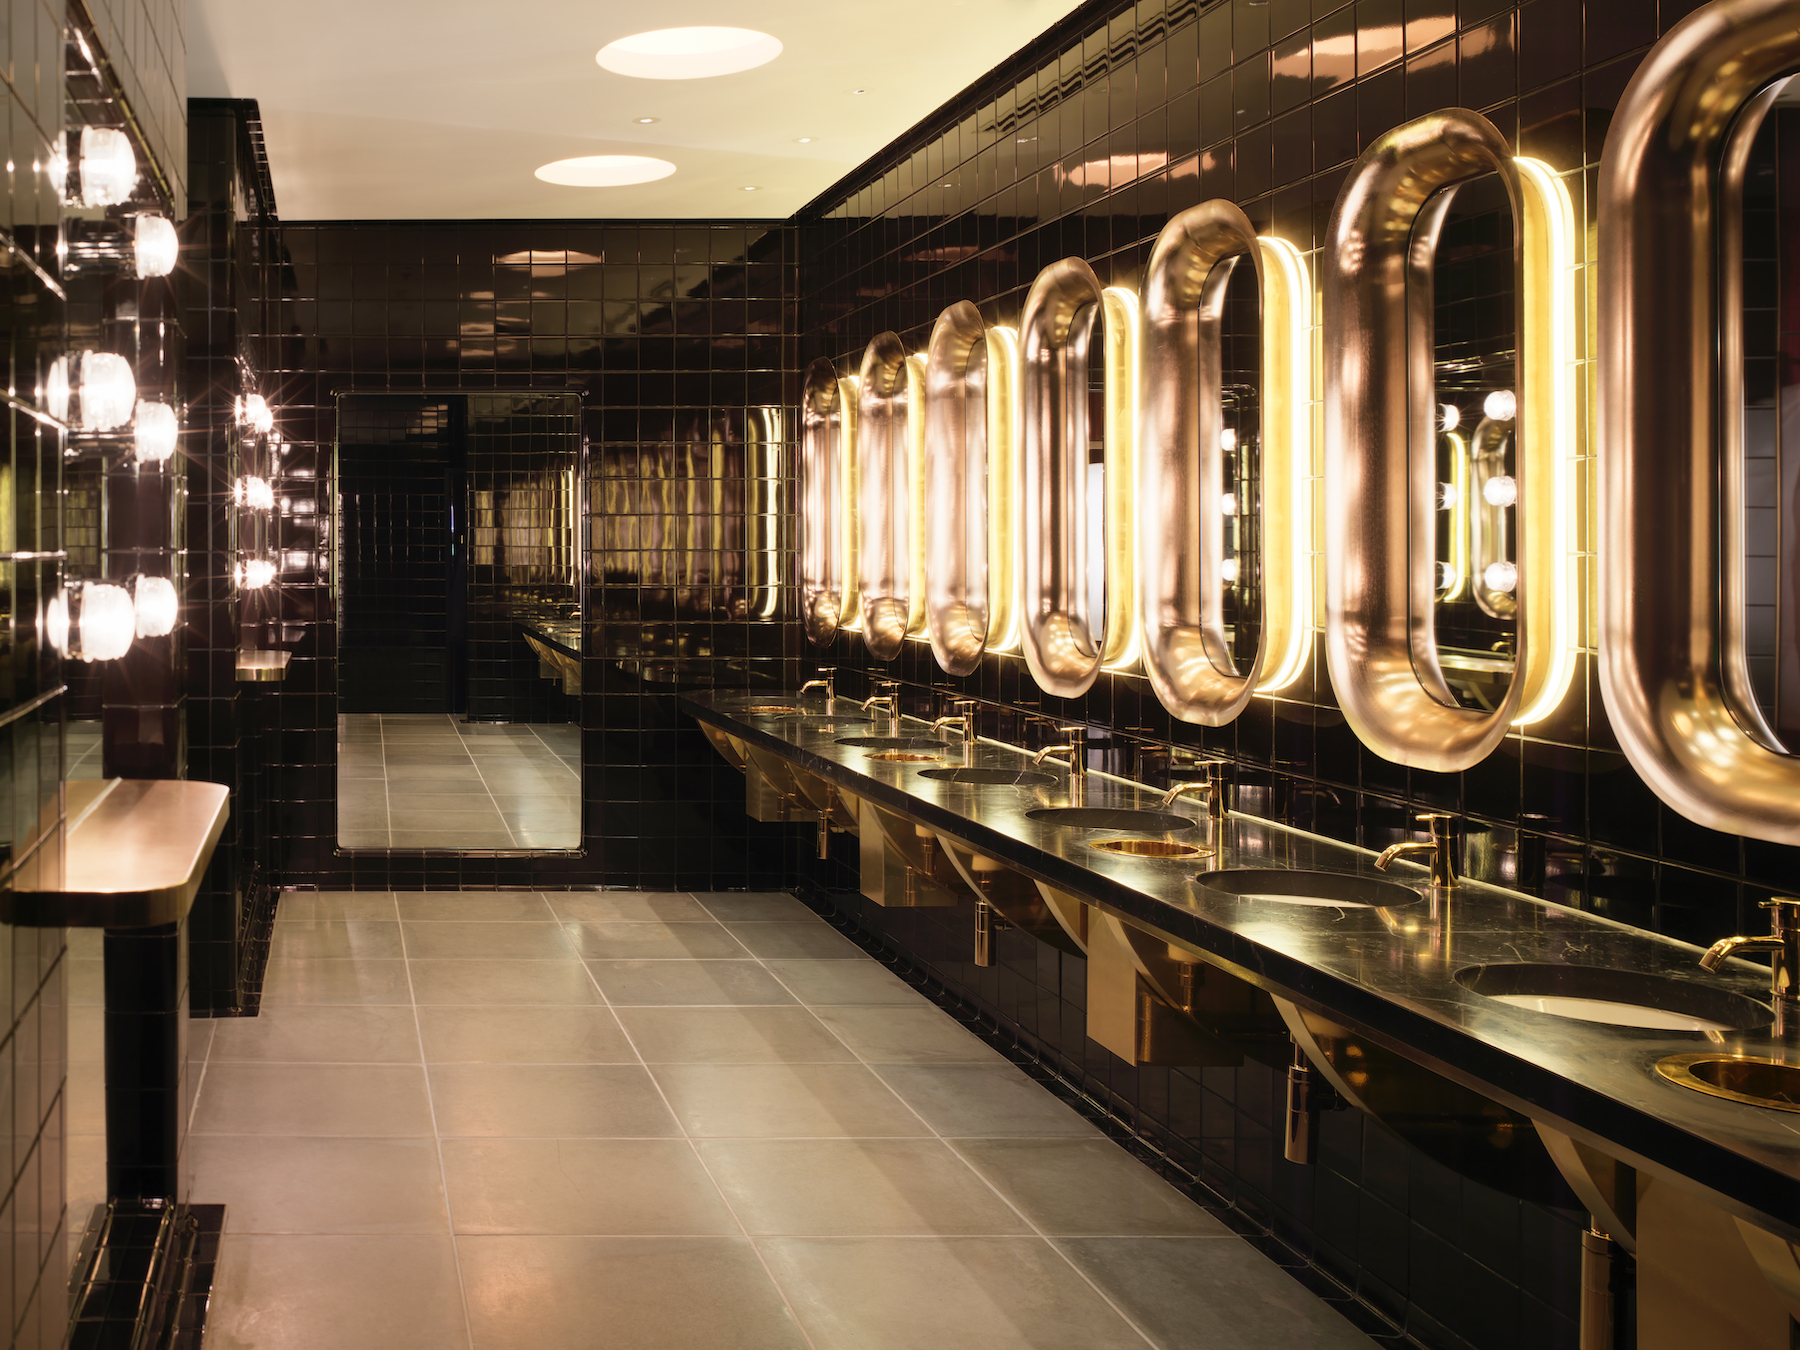 Bathroom at Sea Containers by hotel designer Jacu Strauss in Effect Magazine